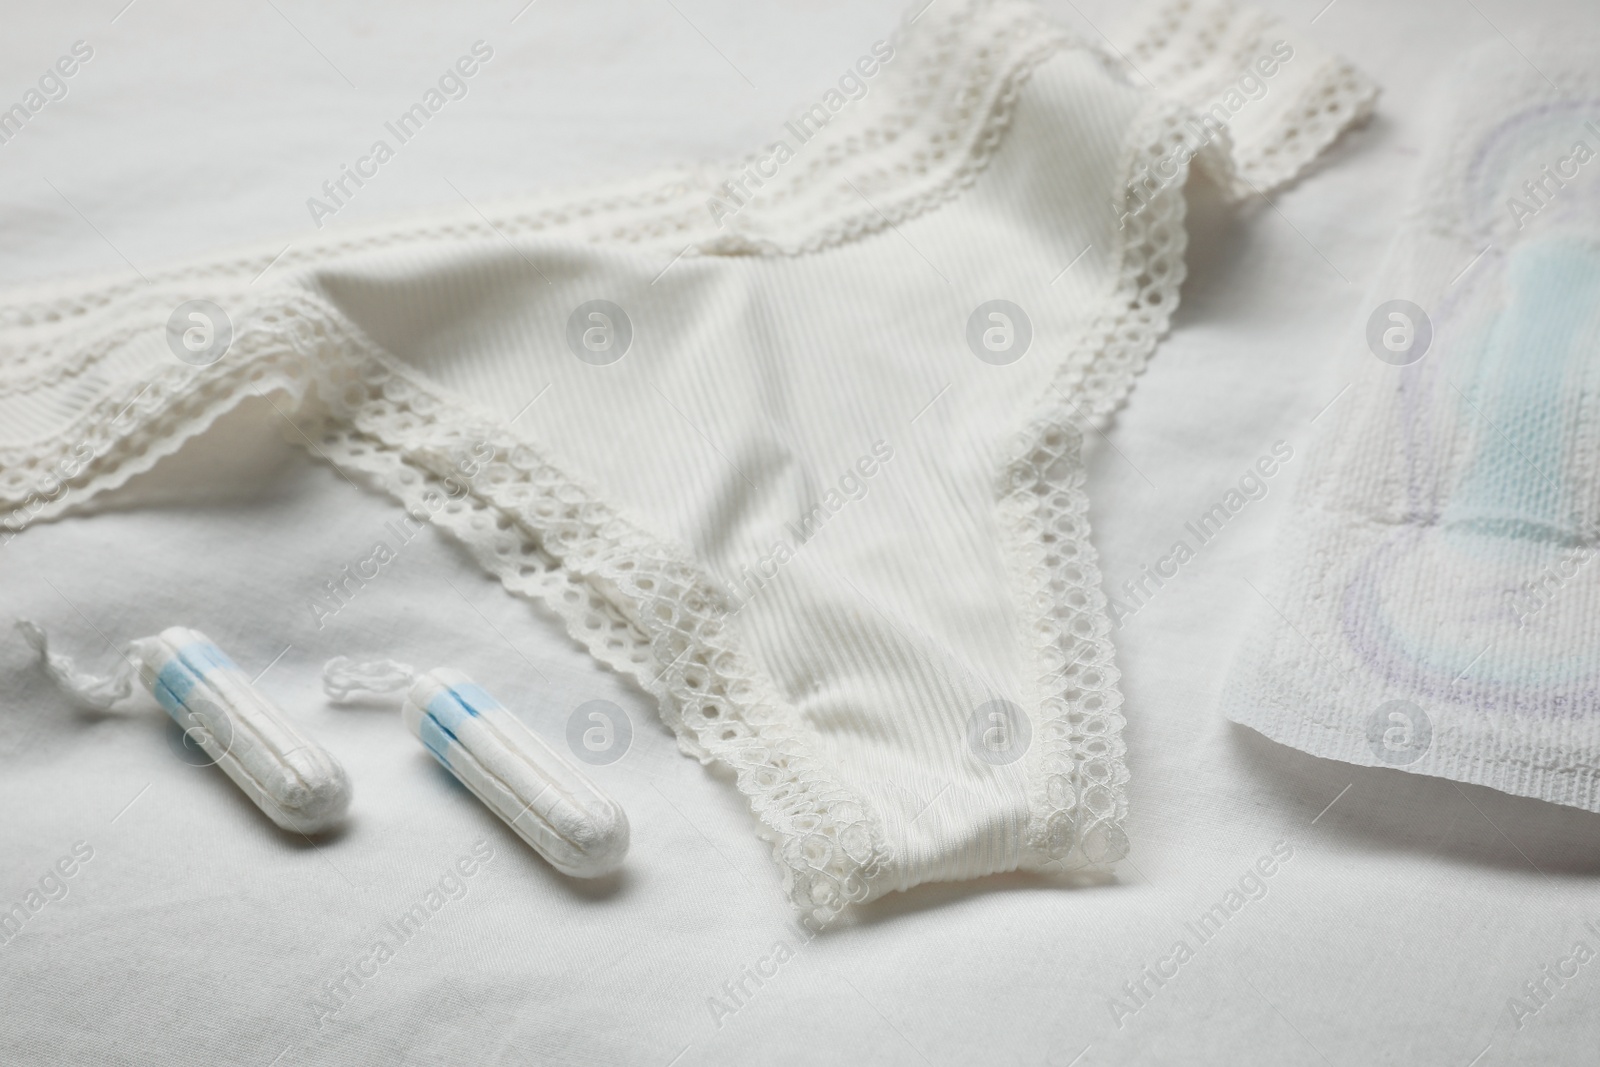 Photo of Woman's panties, menstrual pad and tampons on white fabric